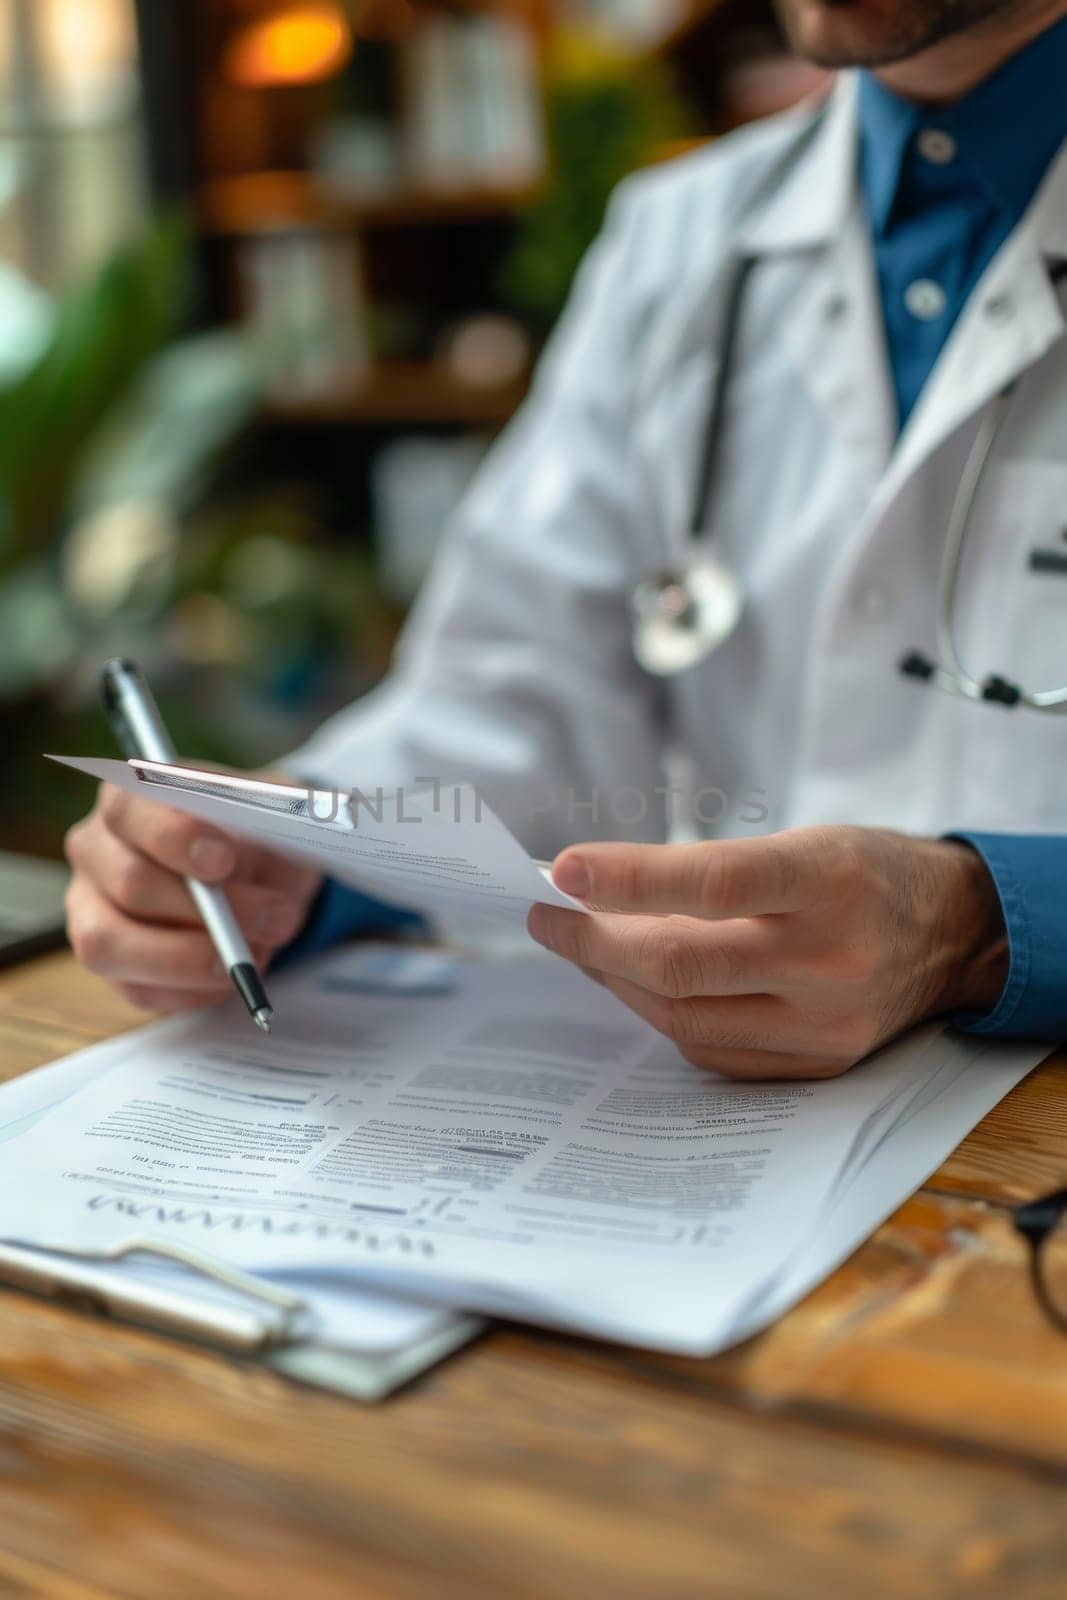 A doctor is sitting at a desk with a clipboard and a pen by itchaznong